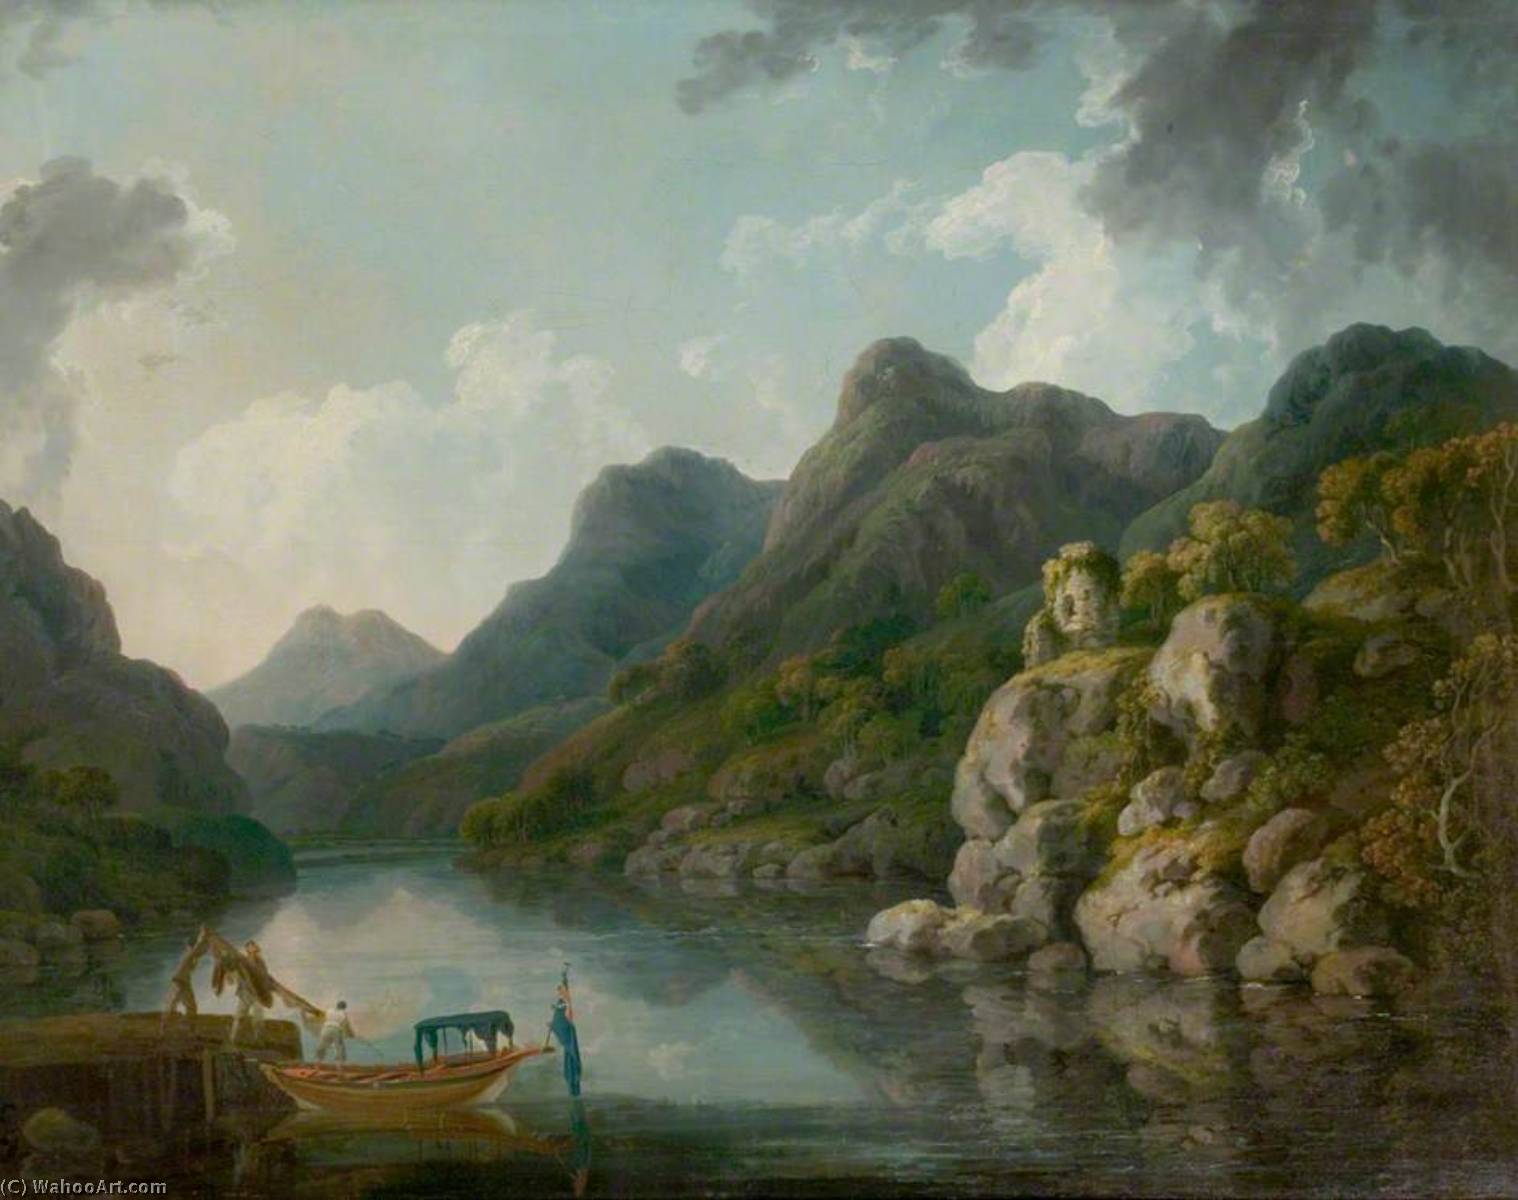 WikiOO.org - Güzel Sanatlar Ansiklopedisi - Resim, Resimler Philip Jacques De Loutherbourg - View of Snowdon with the Castle of Dolbadarn from Llanberis